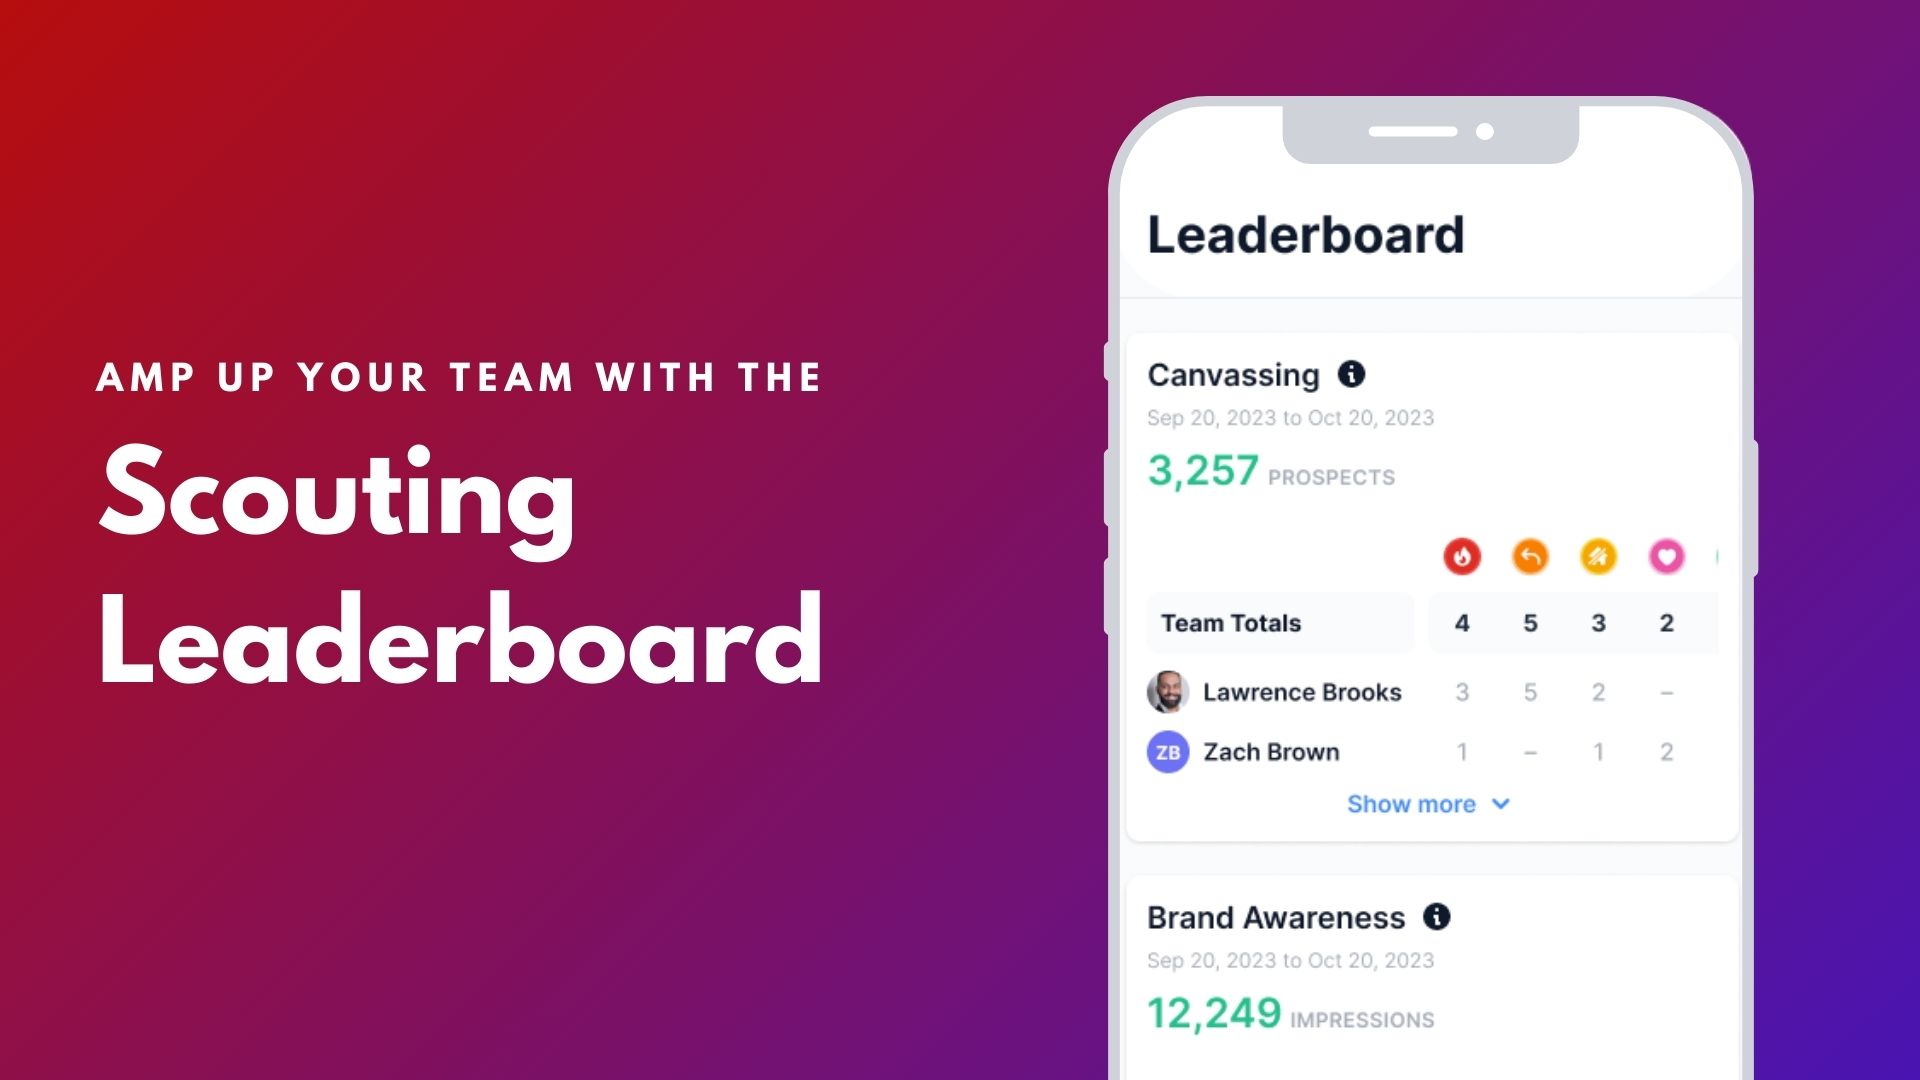 Amp up your team with the Lead Scout leaderboard